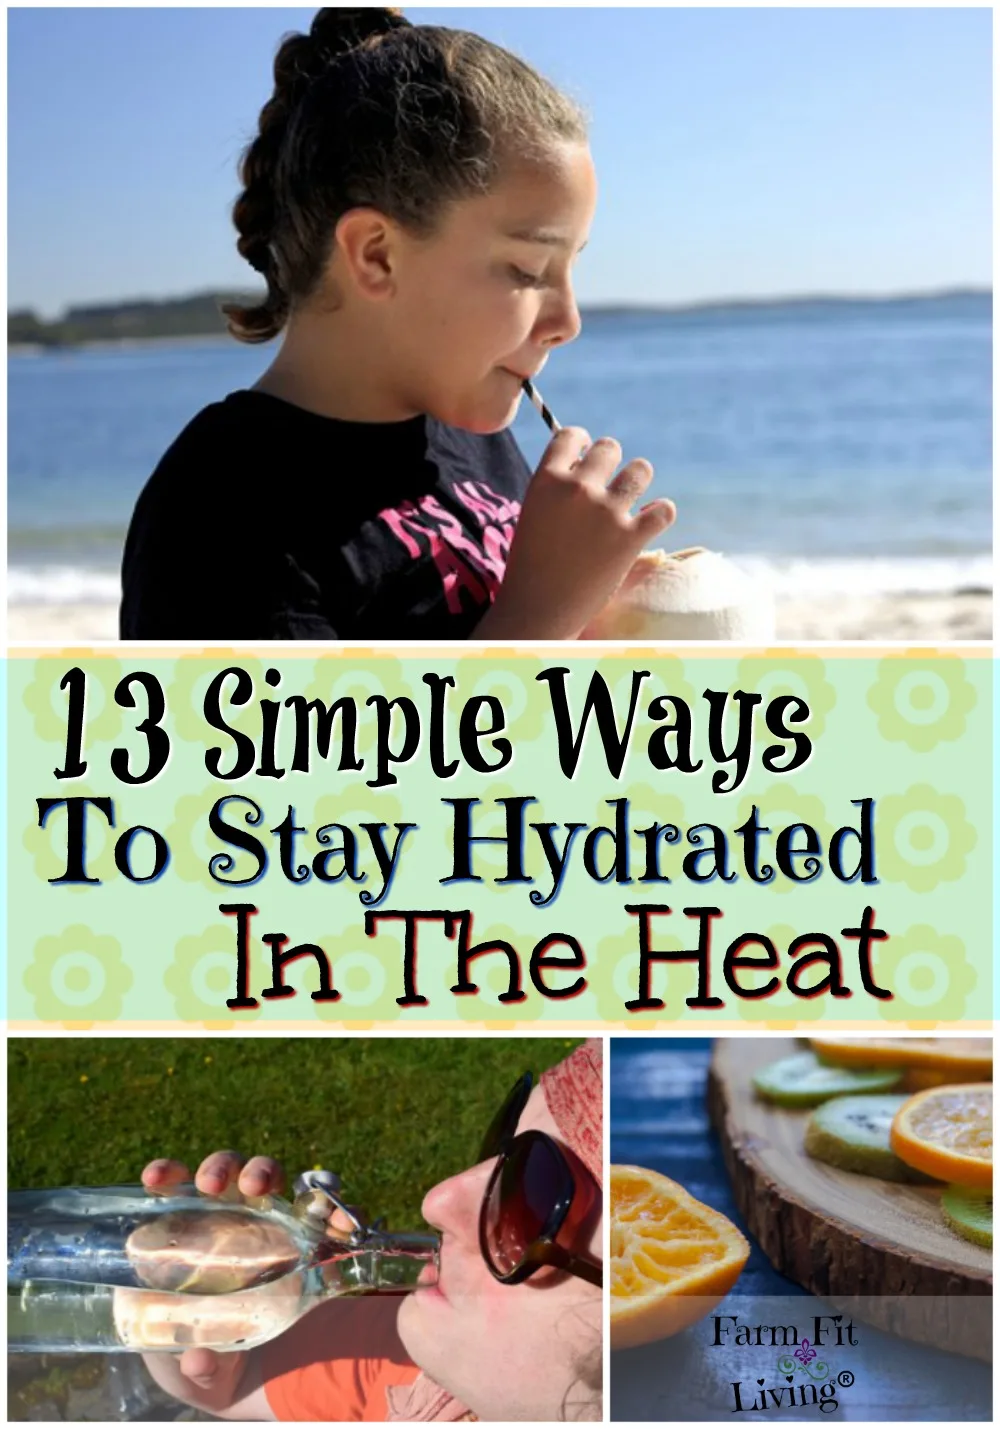 Simple Ways to Stay Hydrated